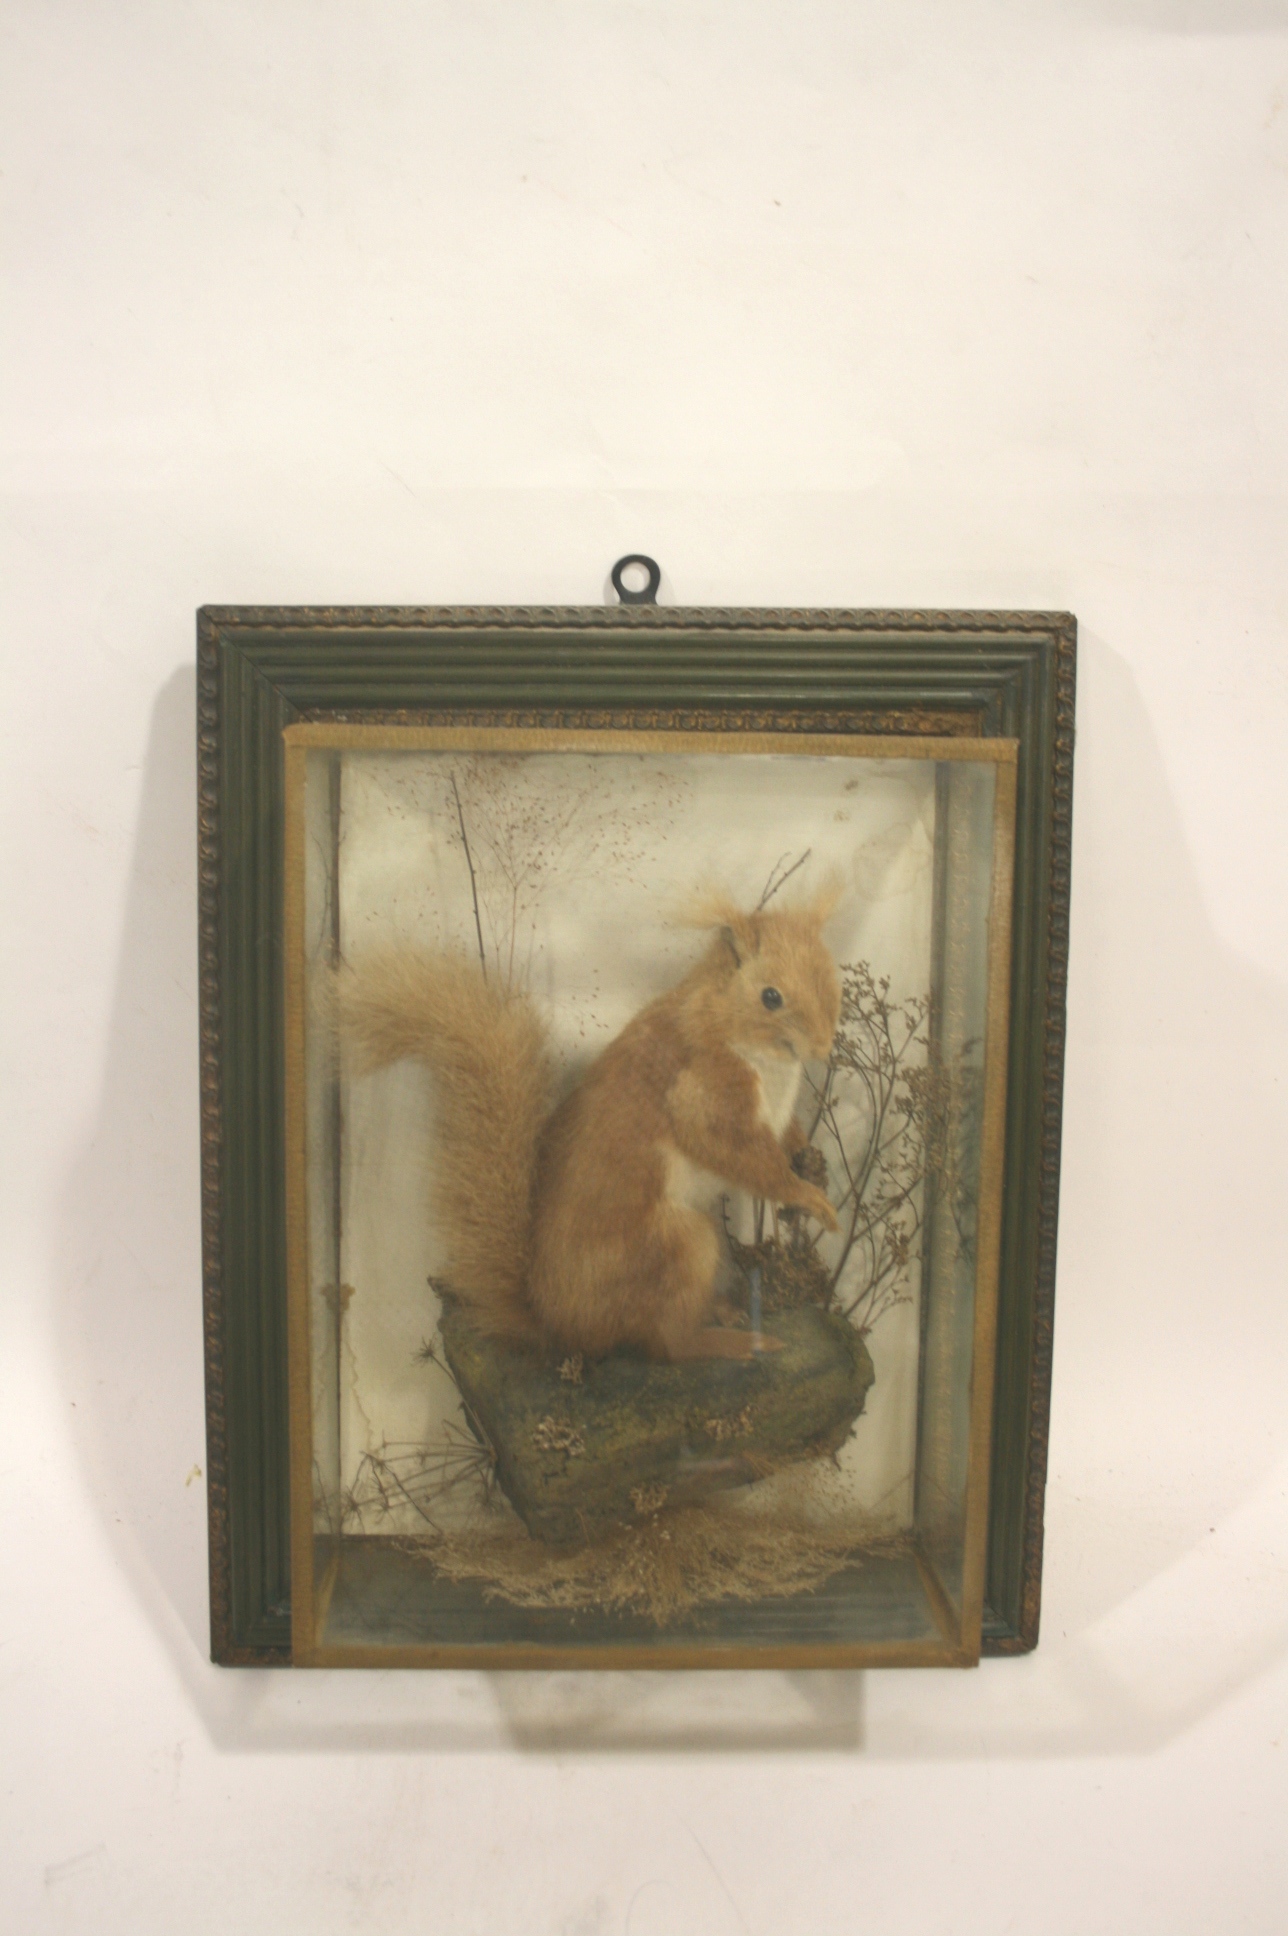 CASED RED SQUIRREL a Squirrel mounted in a naturalistic background, with a wooden and glazed picture